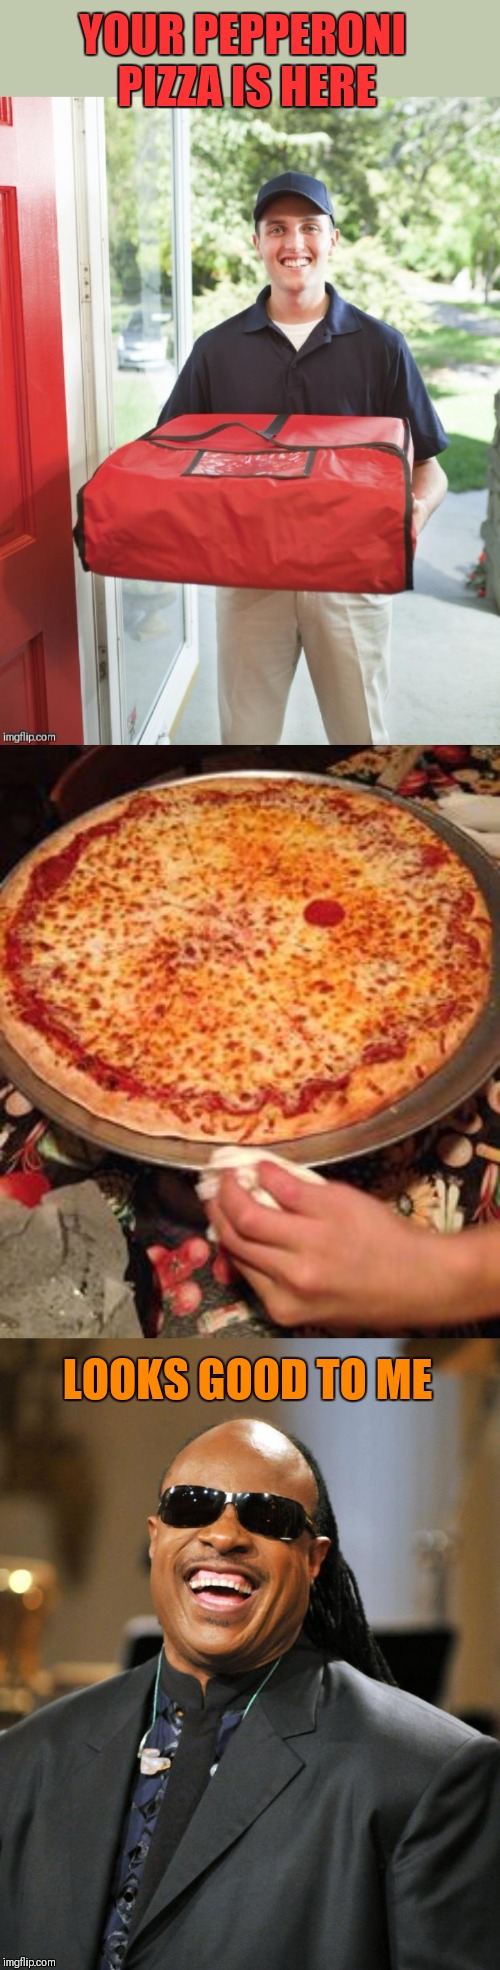 One pepperoni | YOUR PEPPERONI PIZZA IS HERE; LOOKS GOOD TO ME | image tagged in stevie wonder,memes,funny,pizza,food,44colt | made w/ Imgflip meme maker